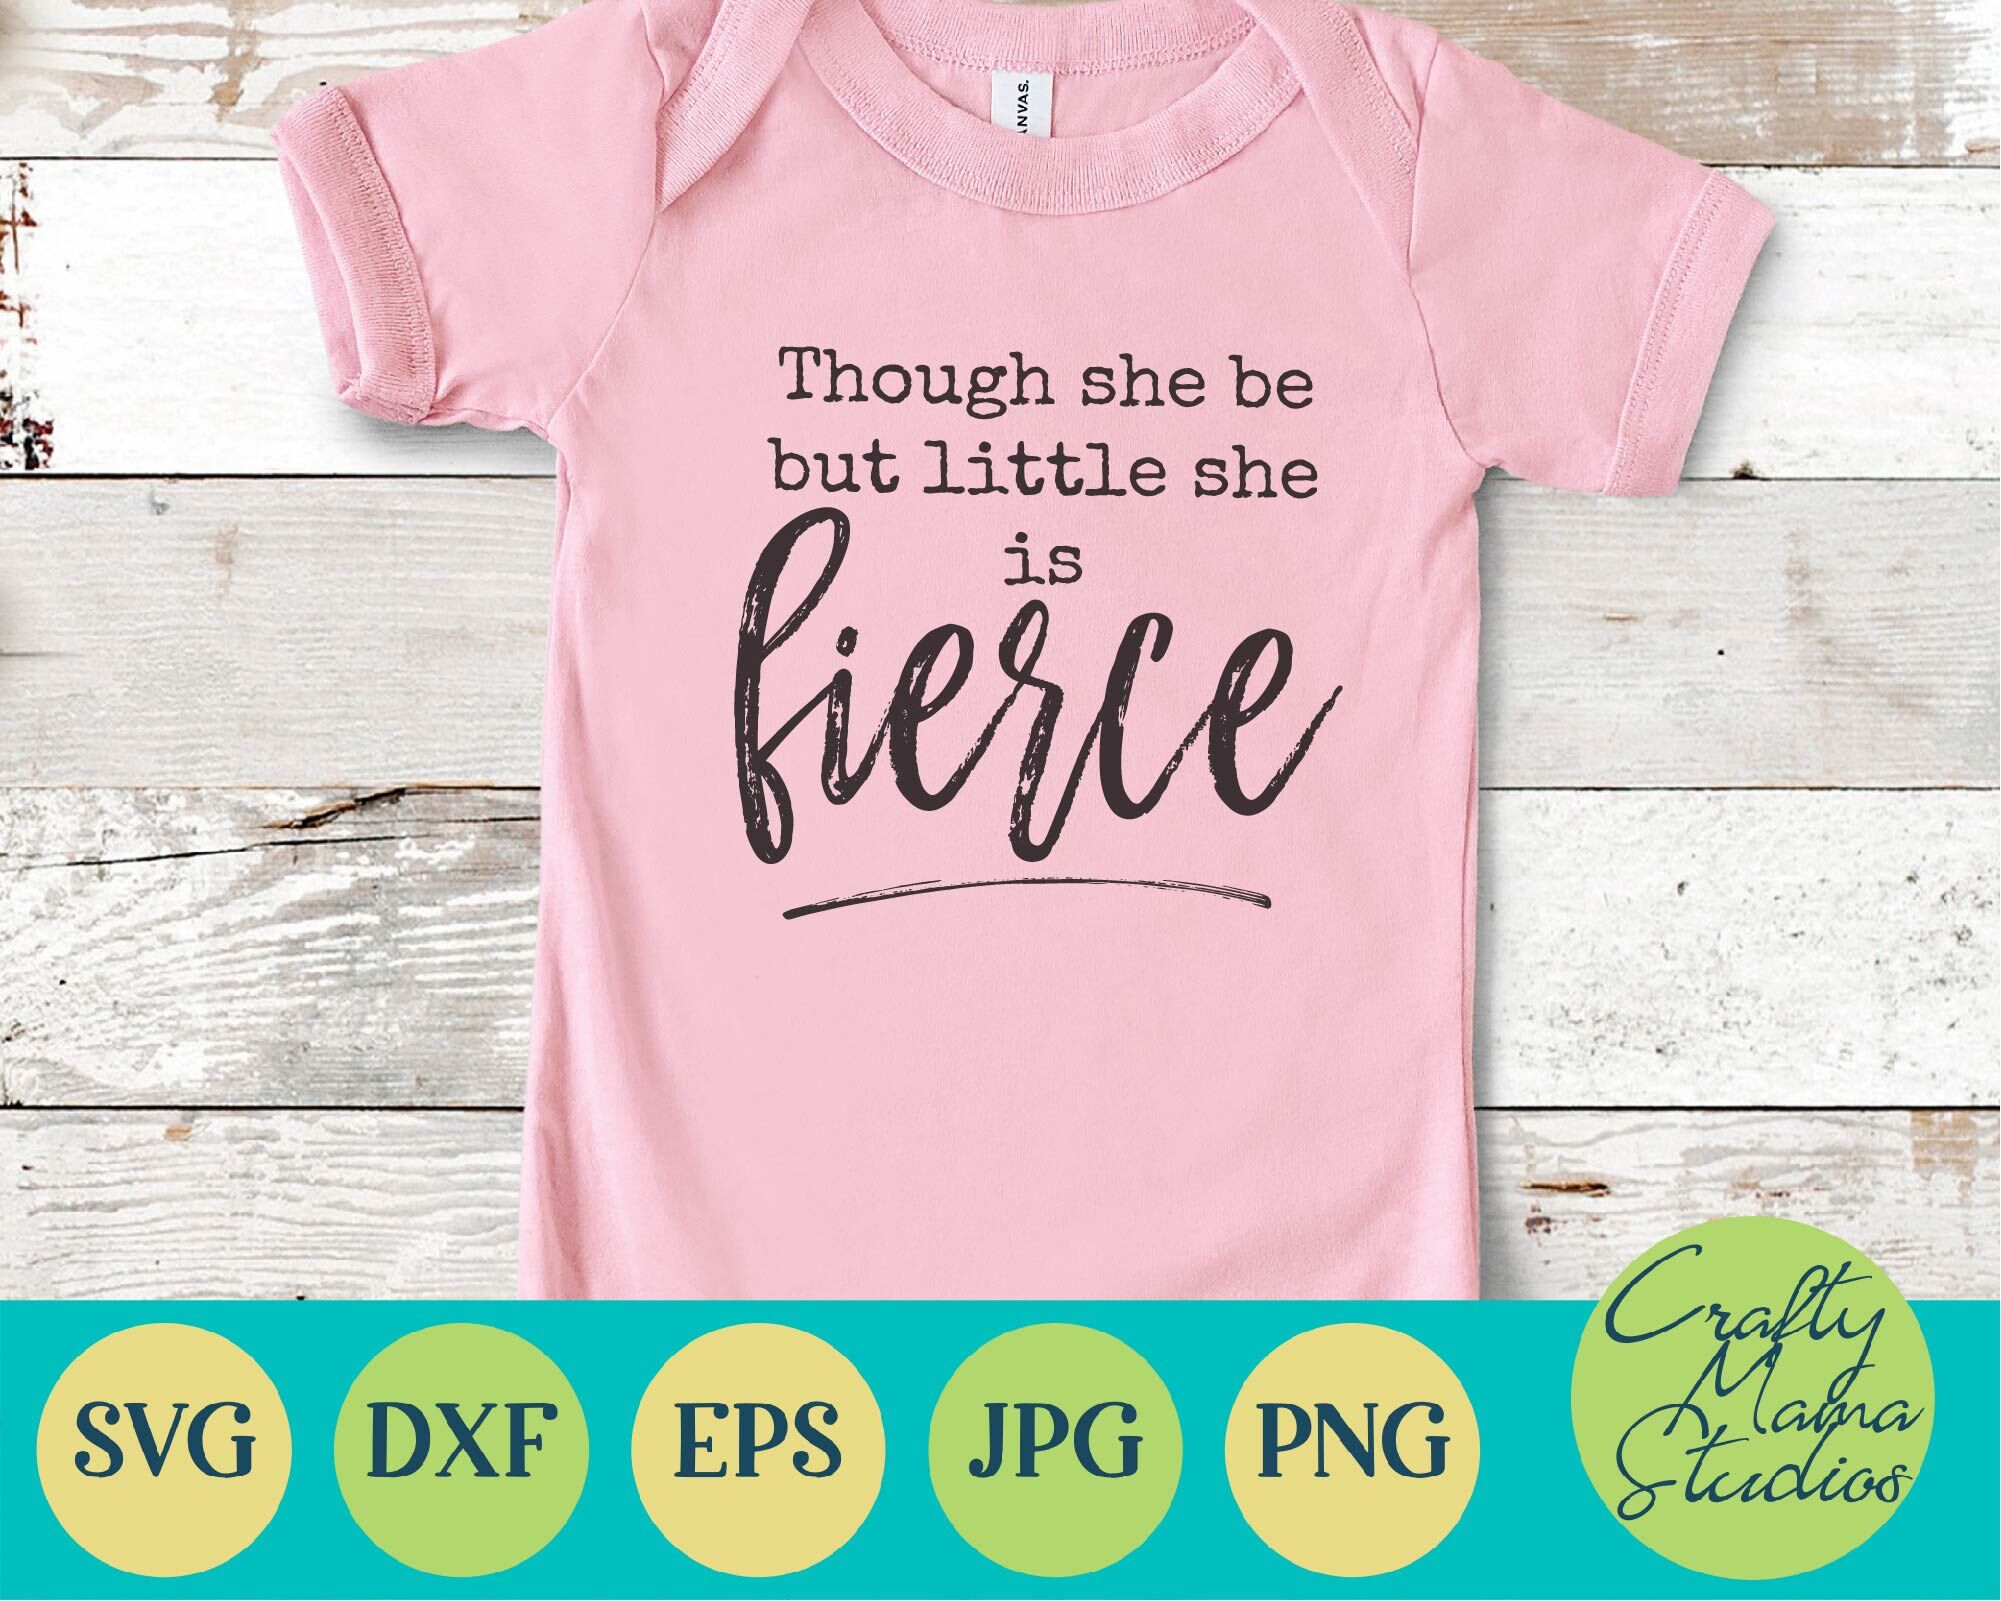 Baby Girl Svg Love Svg Though She Be Little She Is Fierce Svg By Crafty Mama Studios Thehungryjpeg Com